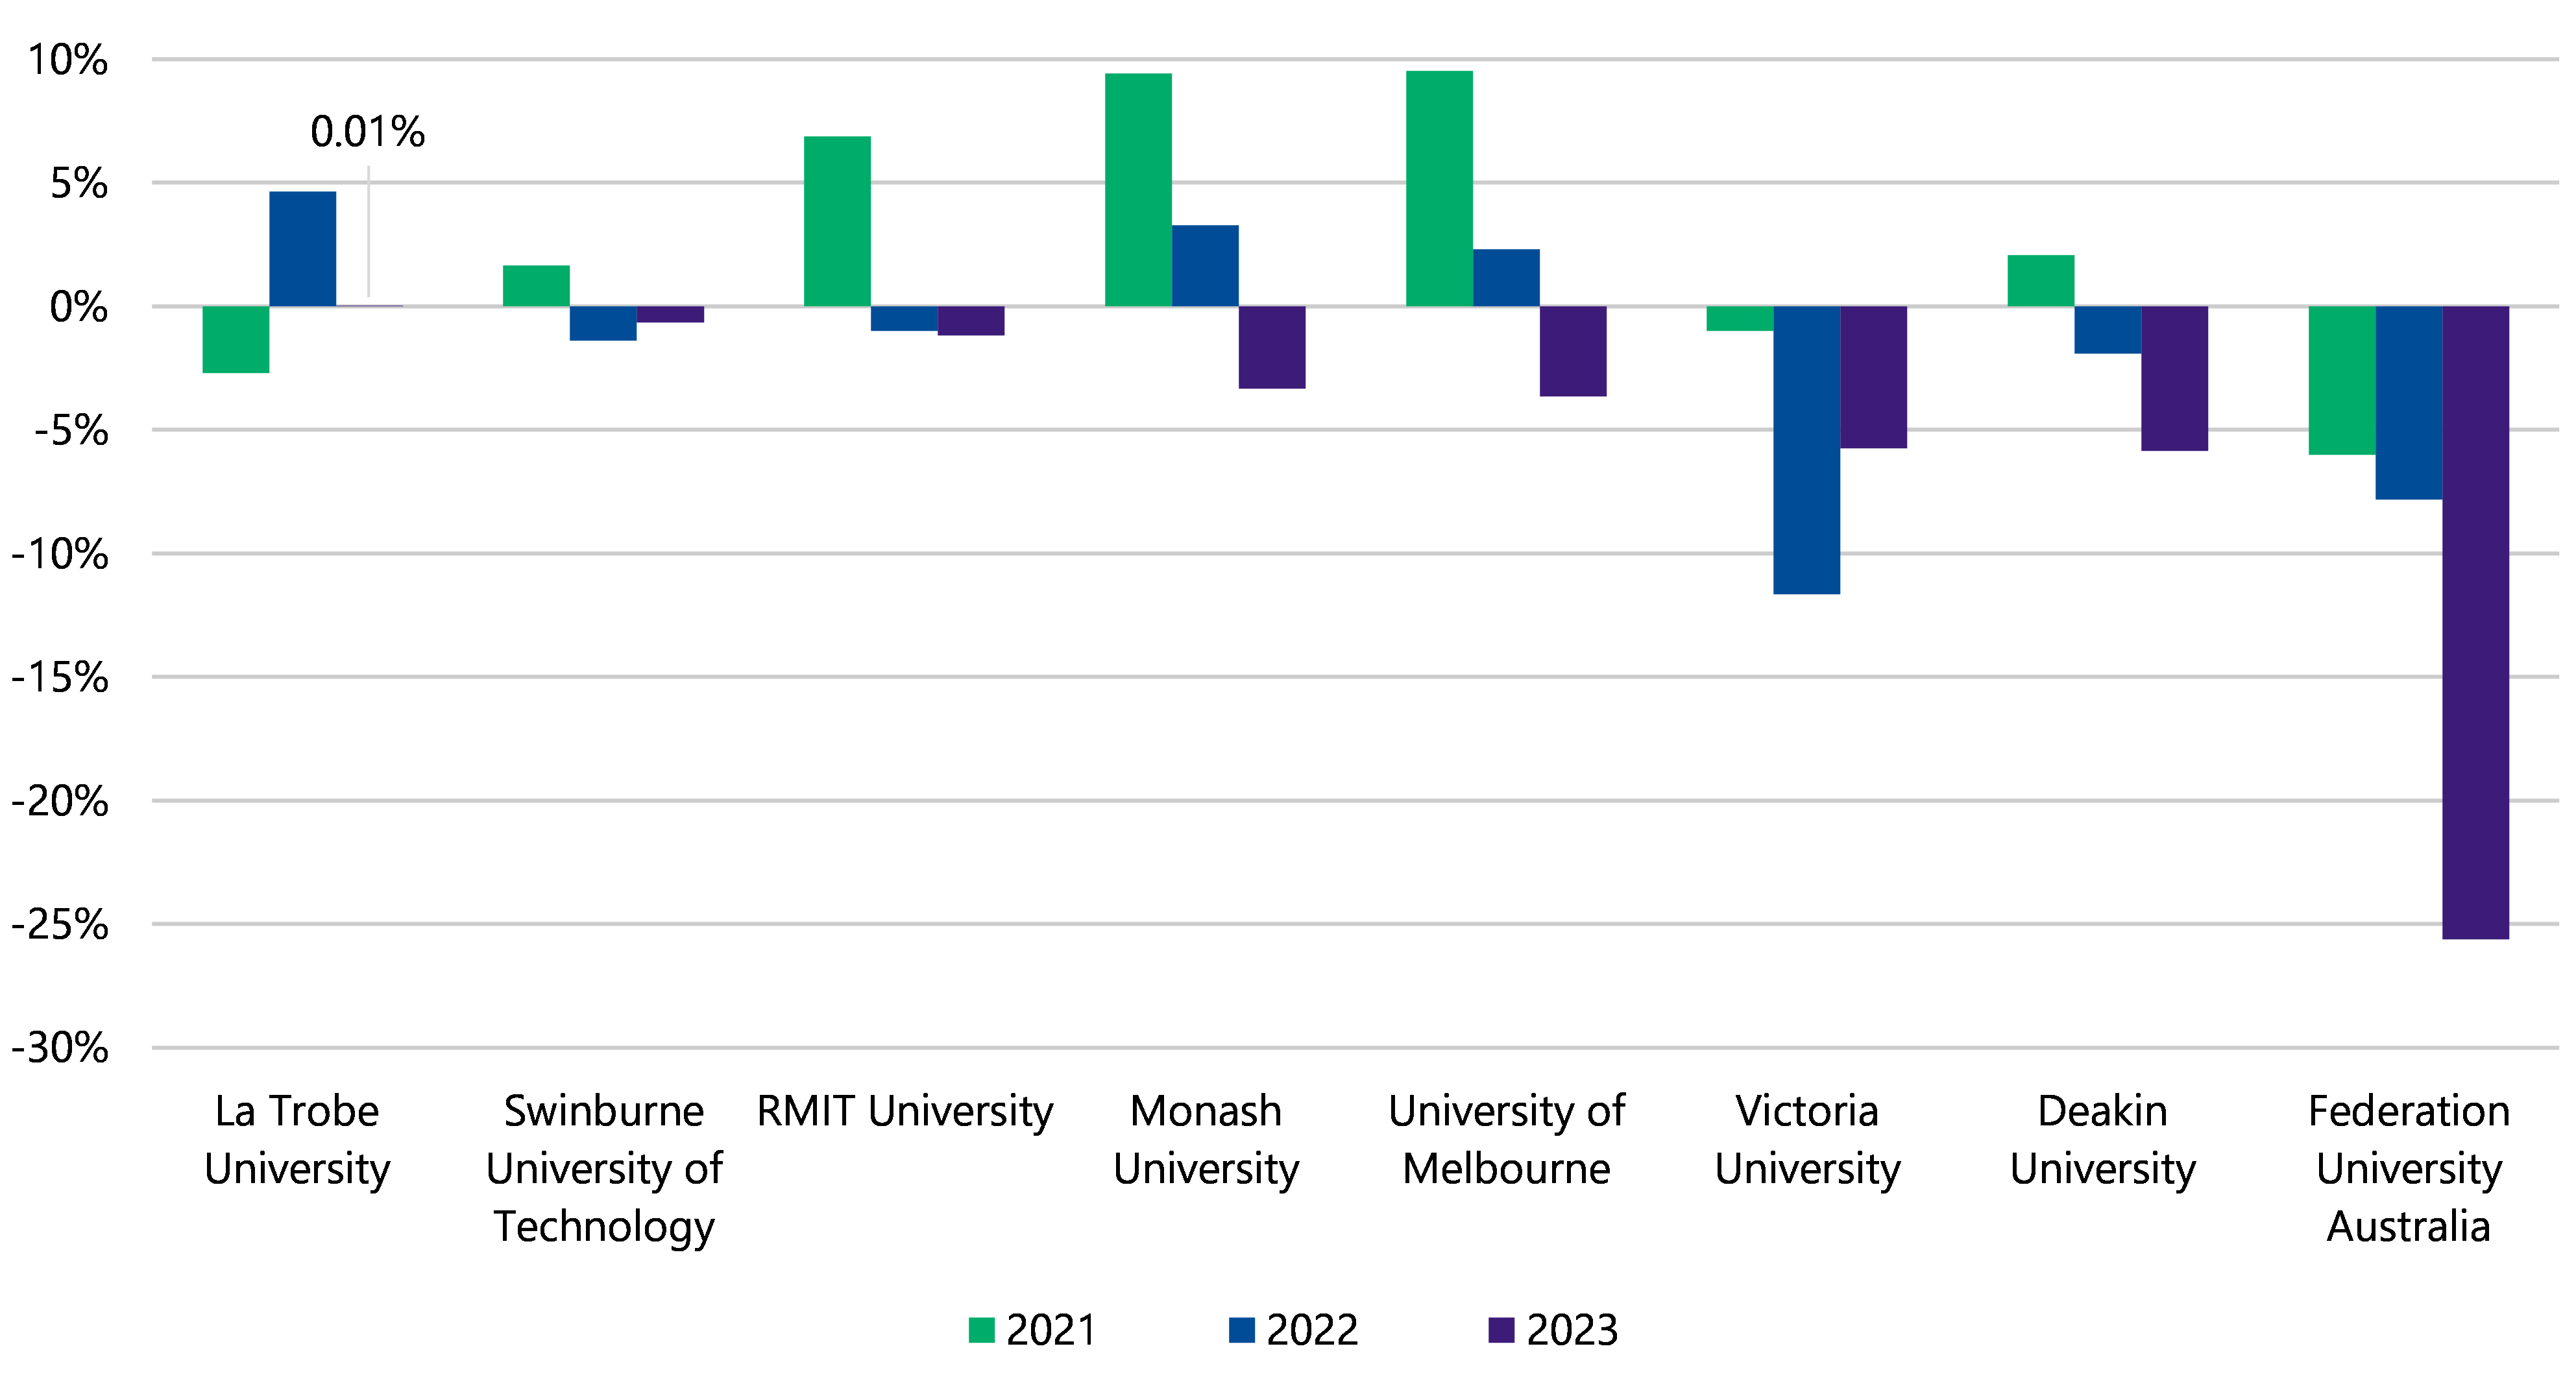 Figure 5 is a bar chart that shows the 8 universities’ net result margins before fair value gains and losses on investments for 2021, 2022 and 2023. La Trobe University was between 0% and –5% in 2021, just under 5% in 2022, and 0.01% in 2023. Swinburne University of Technology was between 0% and 5% in 2021, between 0% and −5% in 2022, and just below 0% in 2023. RMIT University was between 5% and 10% in 2021, between 0% and –5% in 2022, and between 0% and −5% in 2023. Monash University was between 5% and 10% in 2021, between 0% and 5% in 2022, and between 0% and −5% in 2023. University of Melbourne was just below 10% in 2021, between 0% and 5% in 2022, and between 0% and –5% in 2023. Victoria University was between 0% and –5% in 2021, between −10% and −15% in 2022, and just below −5% in 2023. Deakin University was between 0% and 5% in 2021, between 0% and −5% in 2022, and just below −5% in 2023. Federation University Australia was just below −5% in 2021, between −5% and −10% in 2022, and just below −25% in 2023.